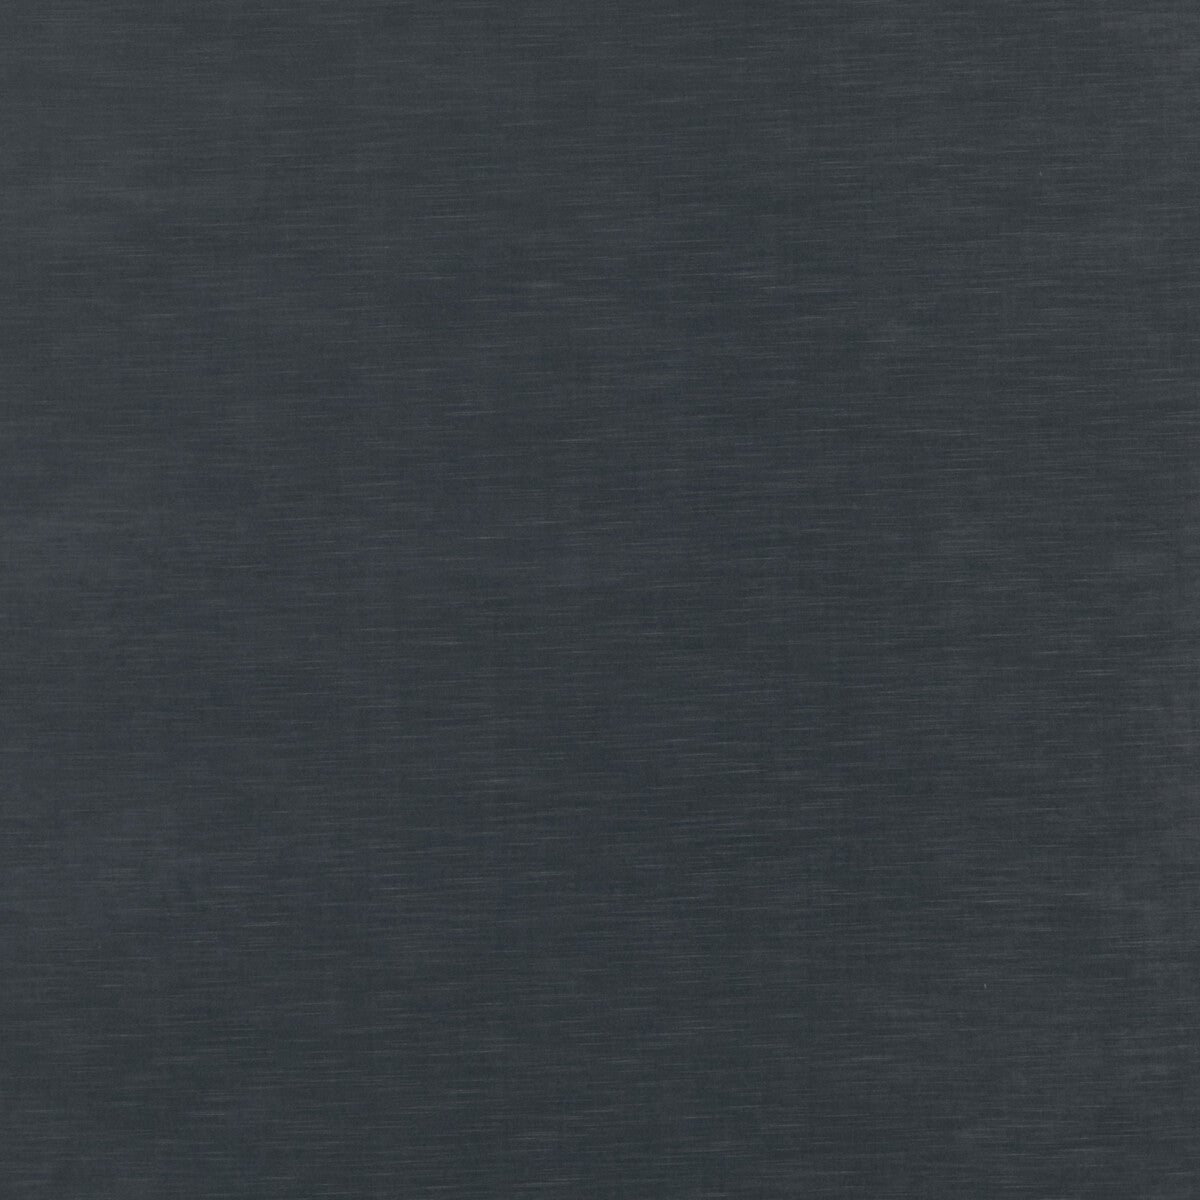 Quintessential Velvet fabric in graphite color - pattern ED85359.970.0 - by Threads in the Quintessential Velvet collection